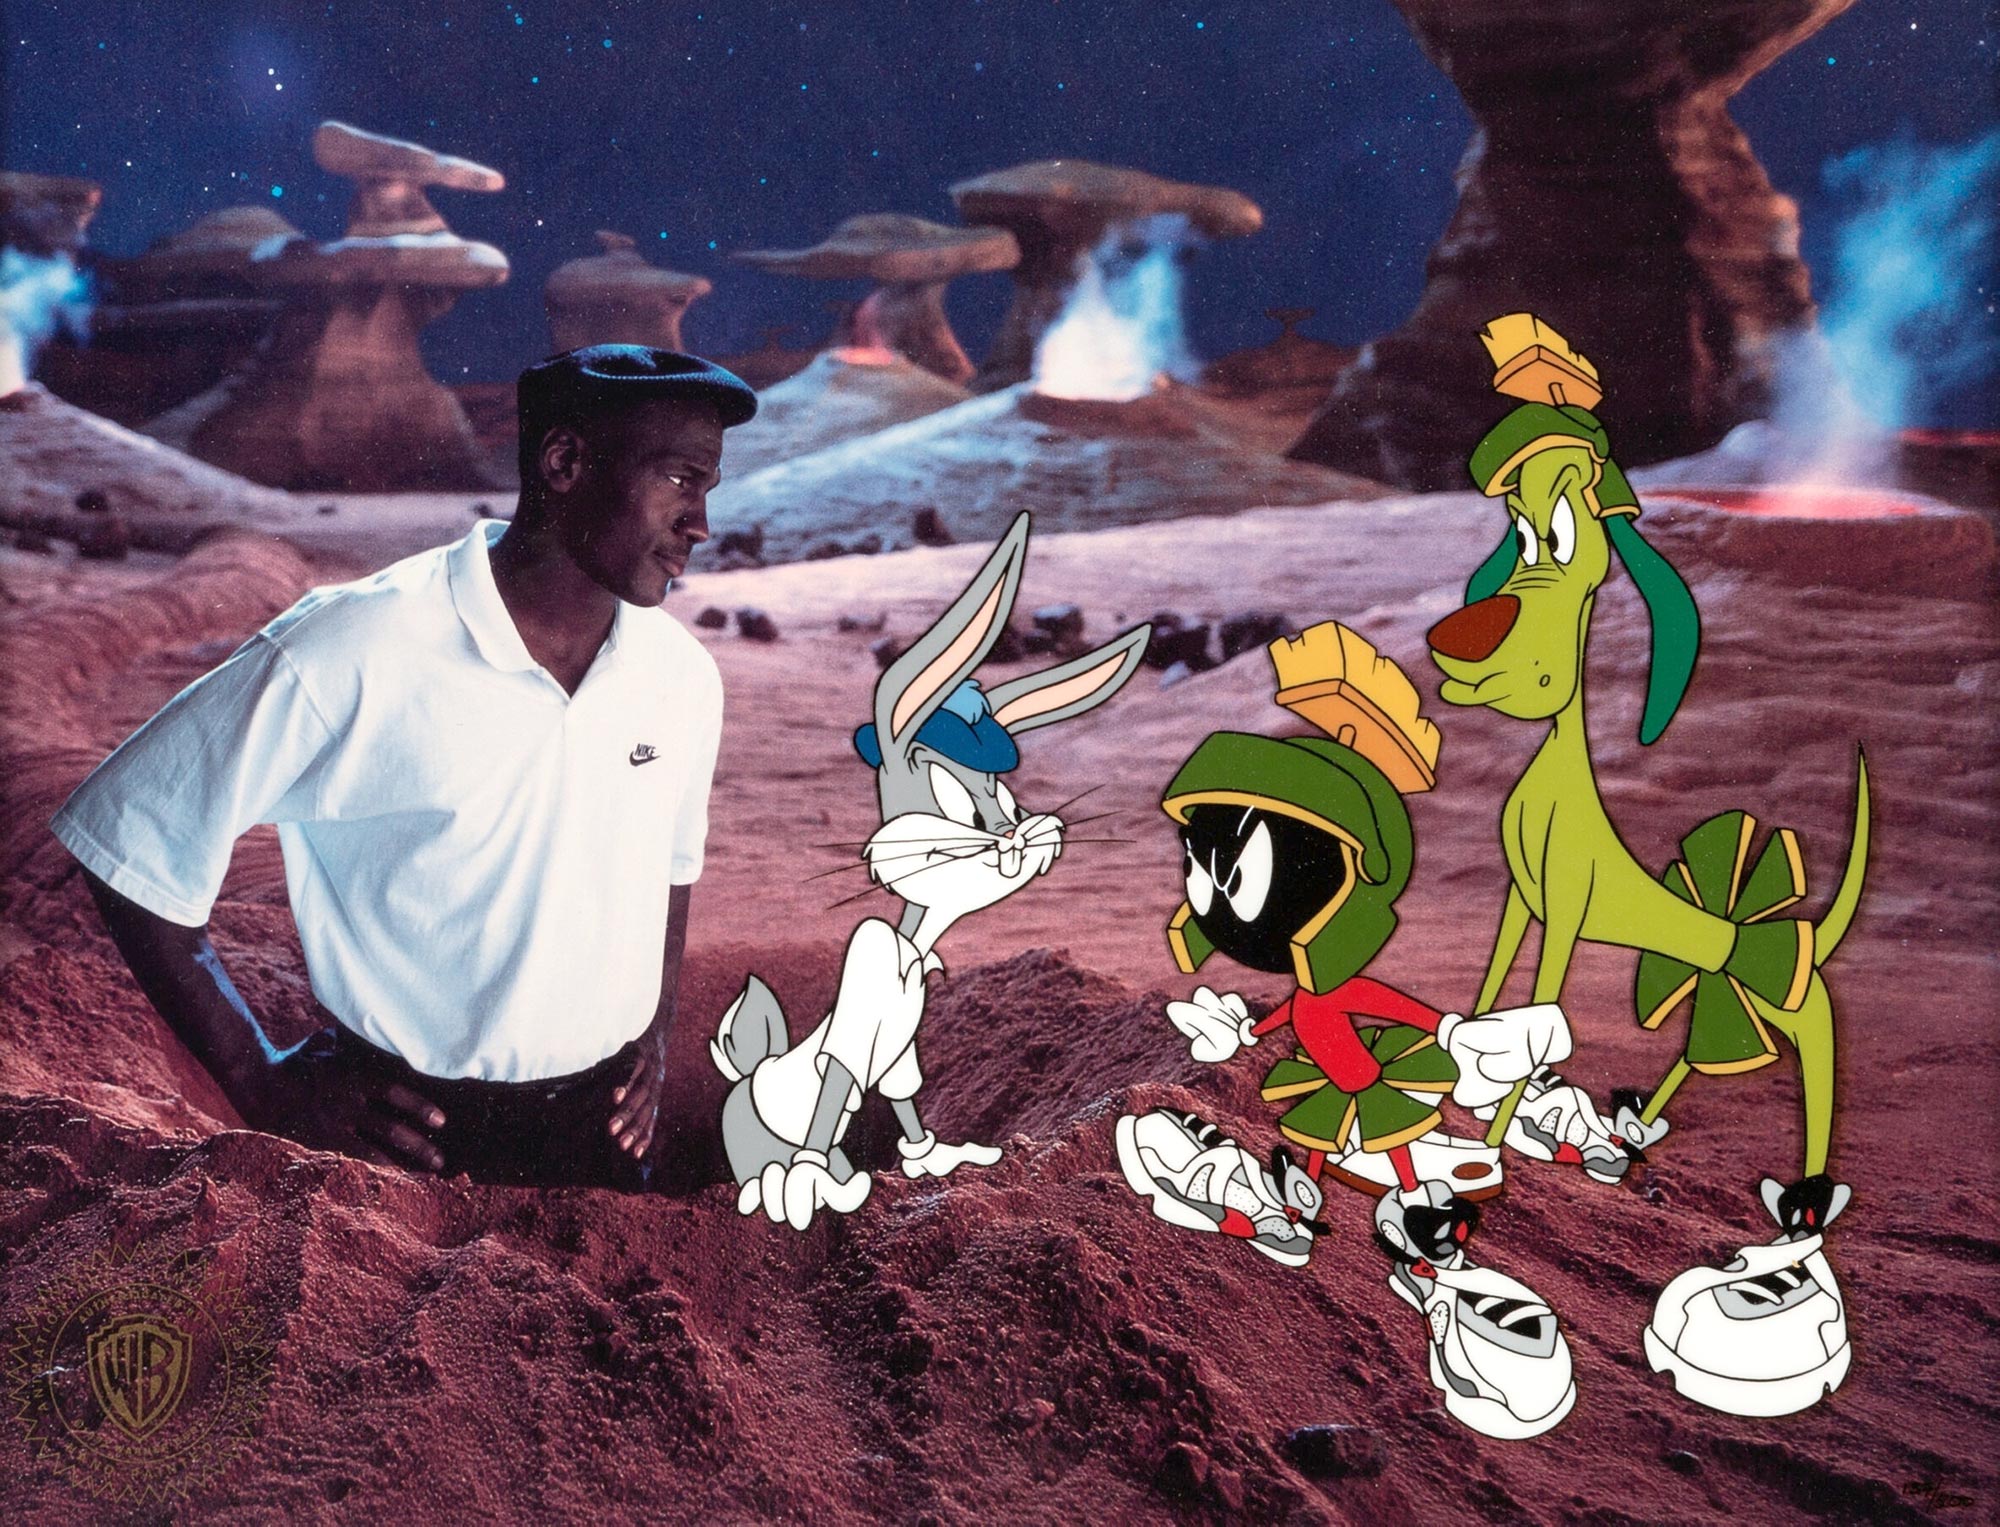 Bugs Bunny and Michael Jordan join forces in the Nike television commercial “Aerospace Jordan."